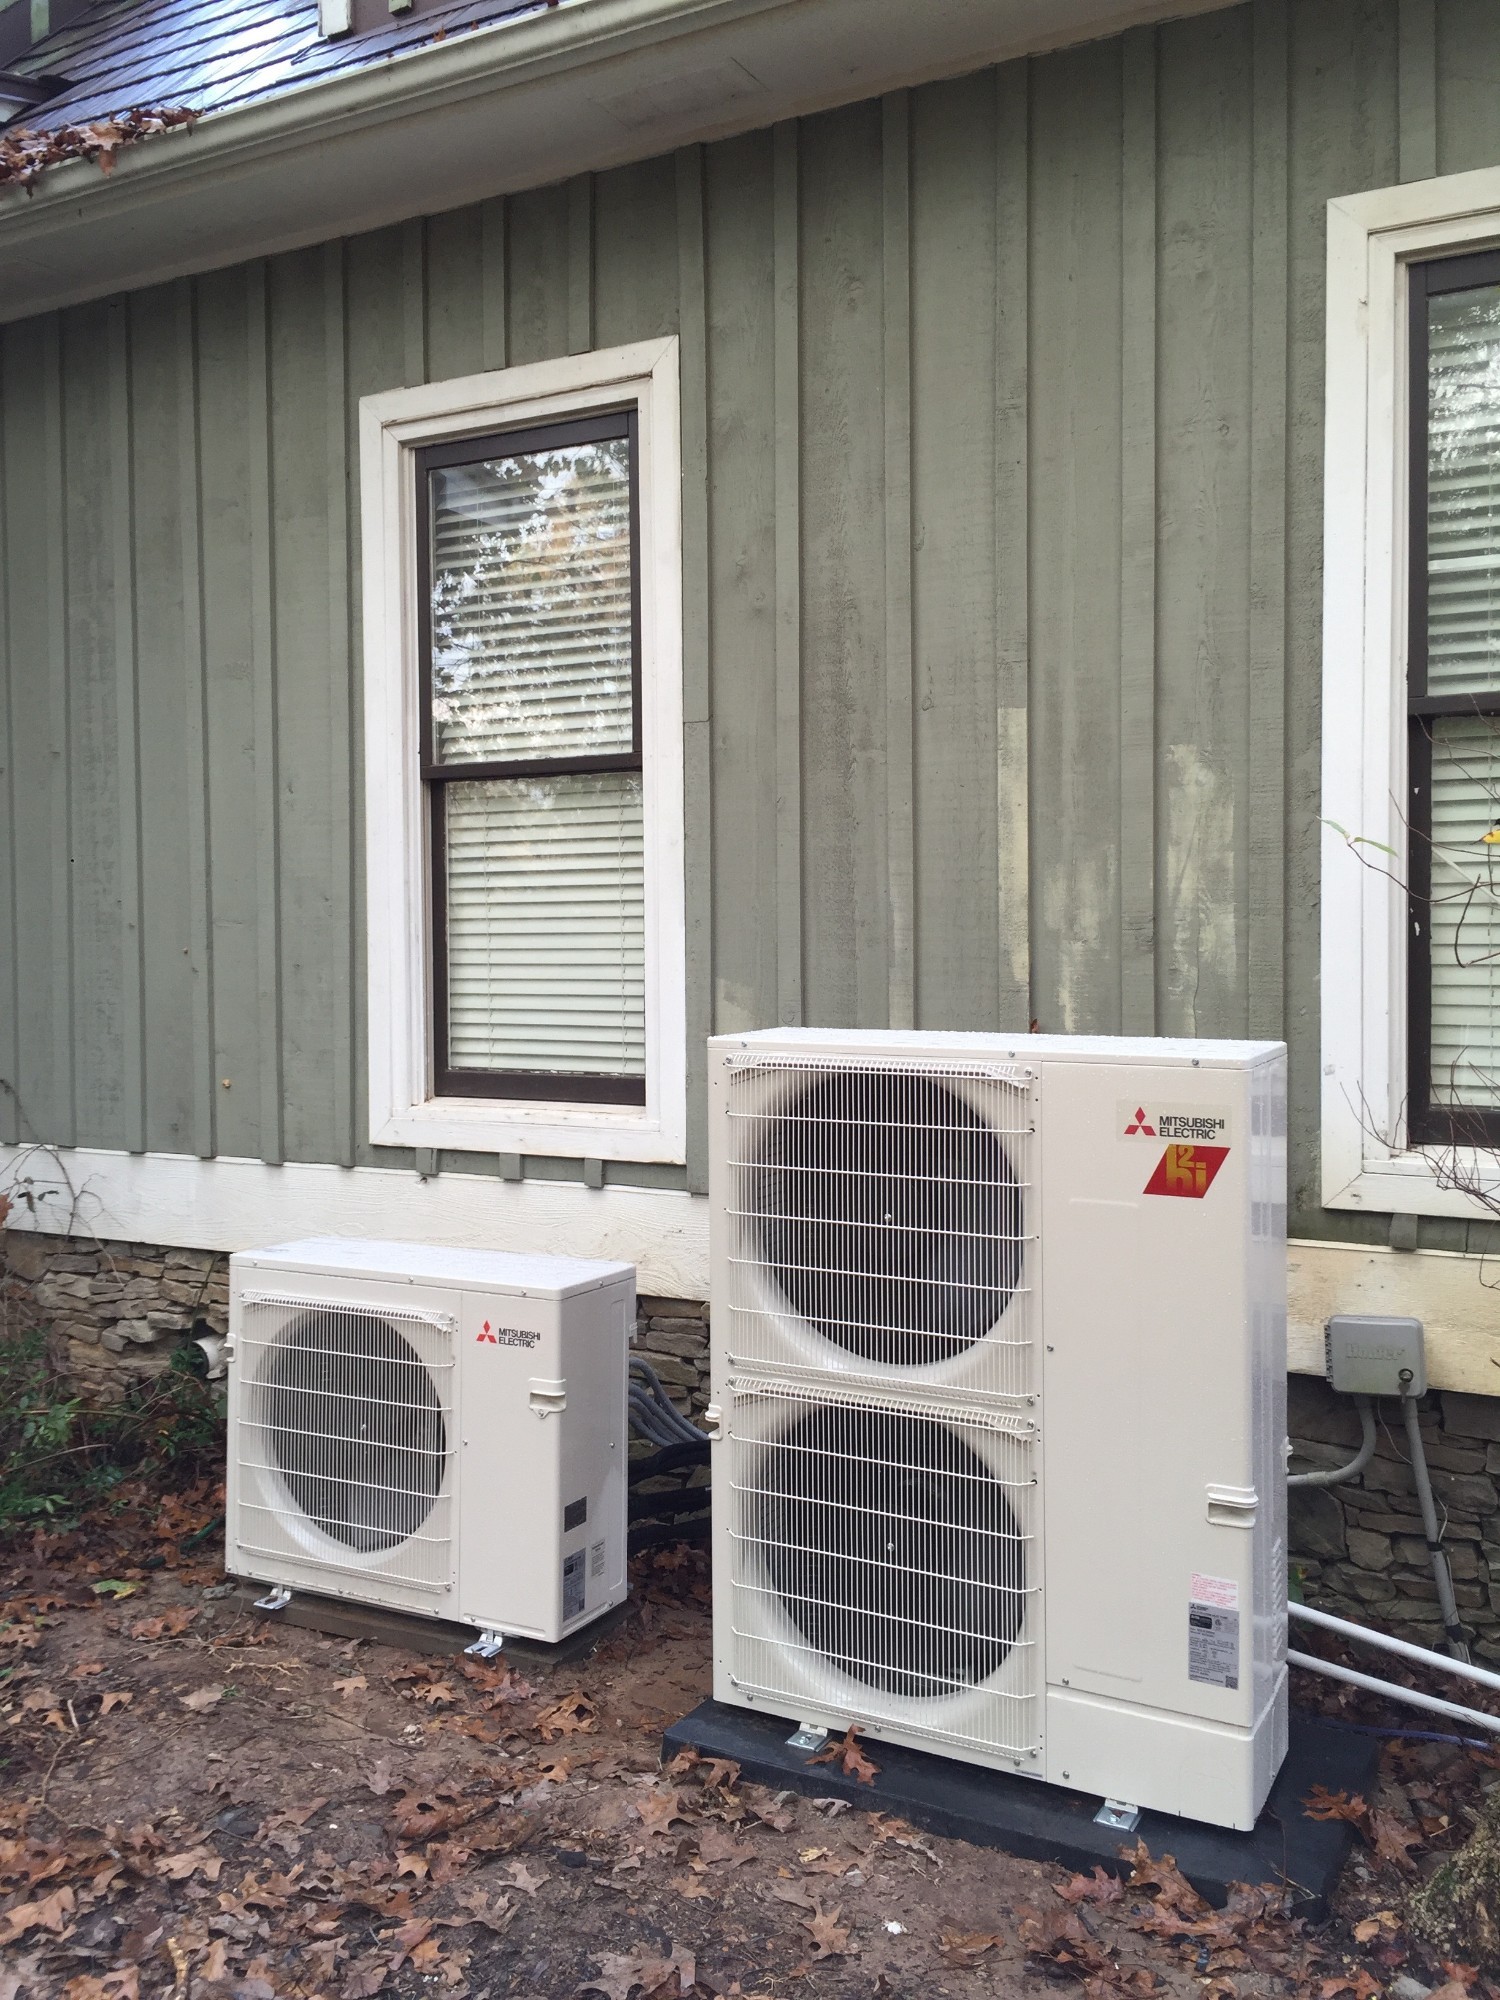 Douglas Cooling and Heating installs New, Efficient Mitsubishi Ductless